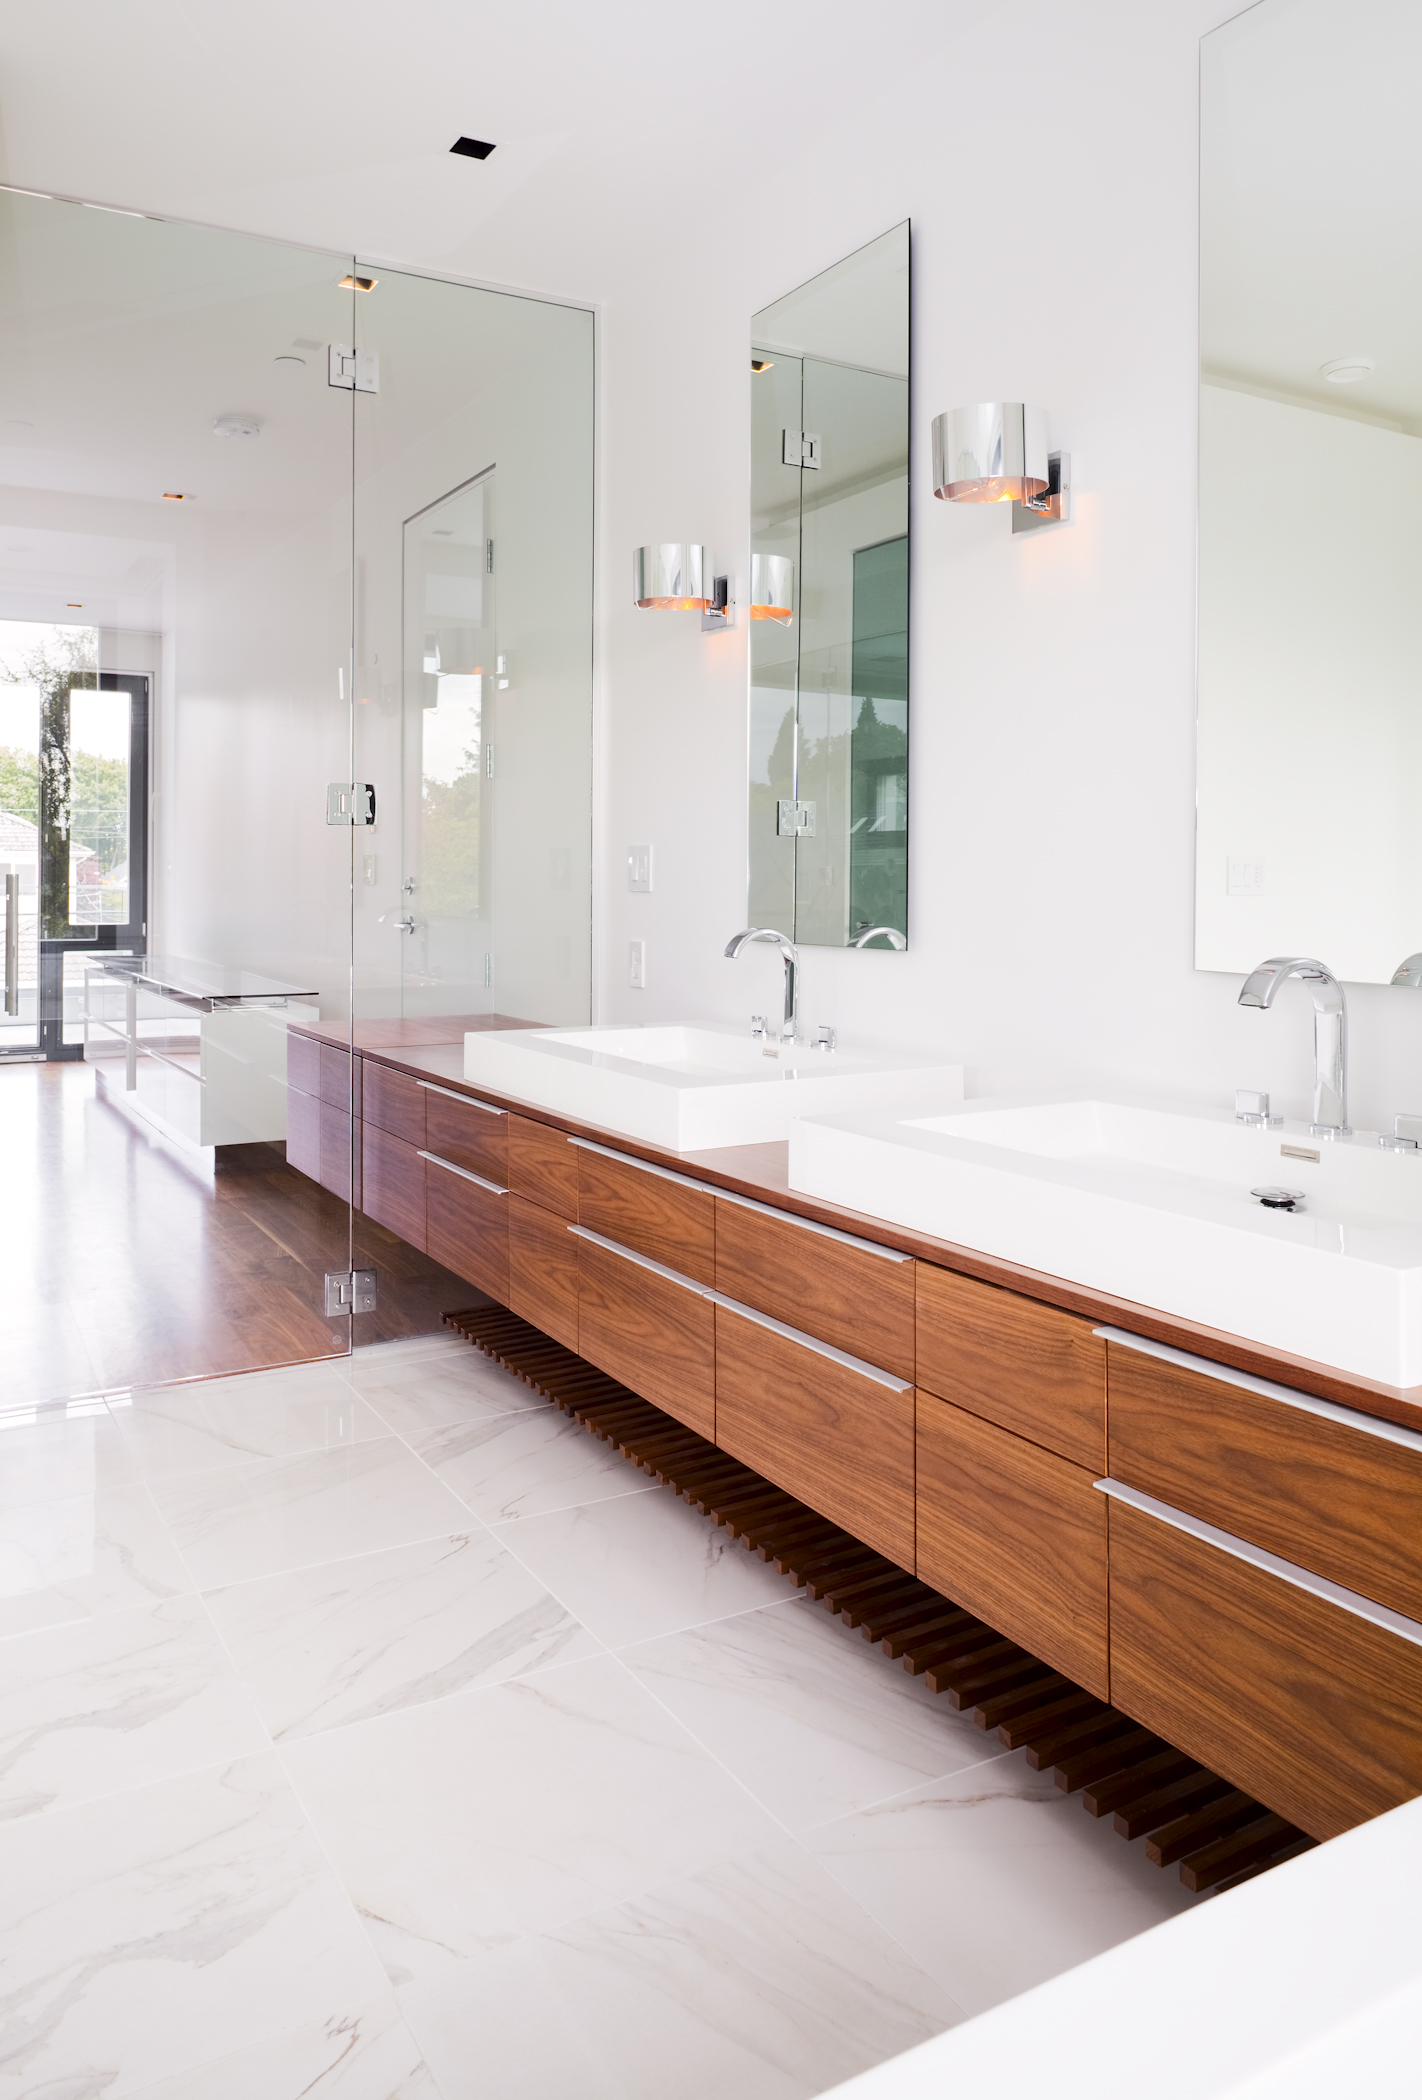 Spacious bathroom with two bathrooms and a big mirror at a custom home in Vancouver.